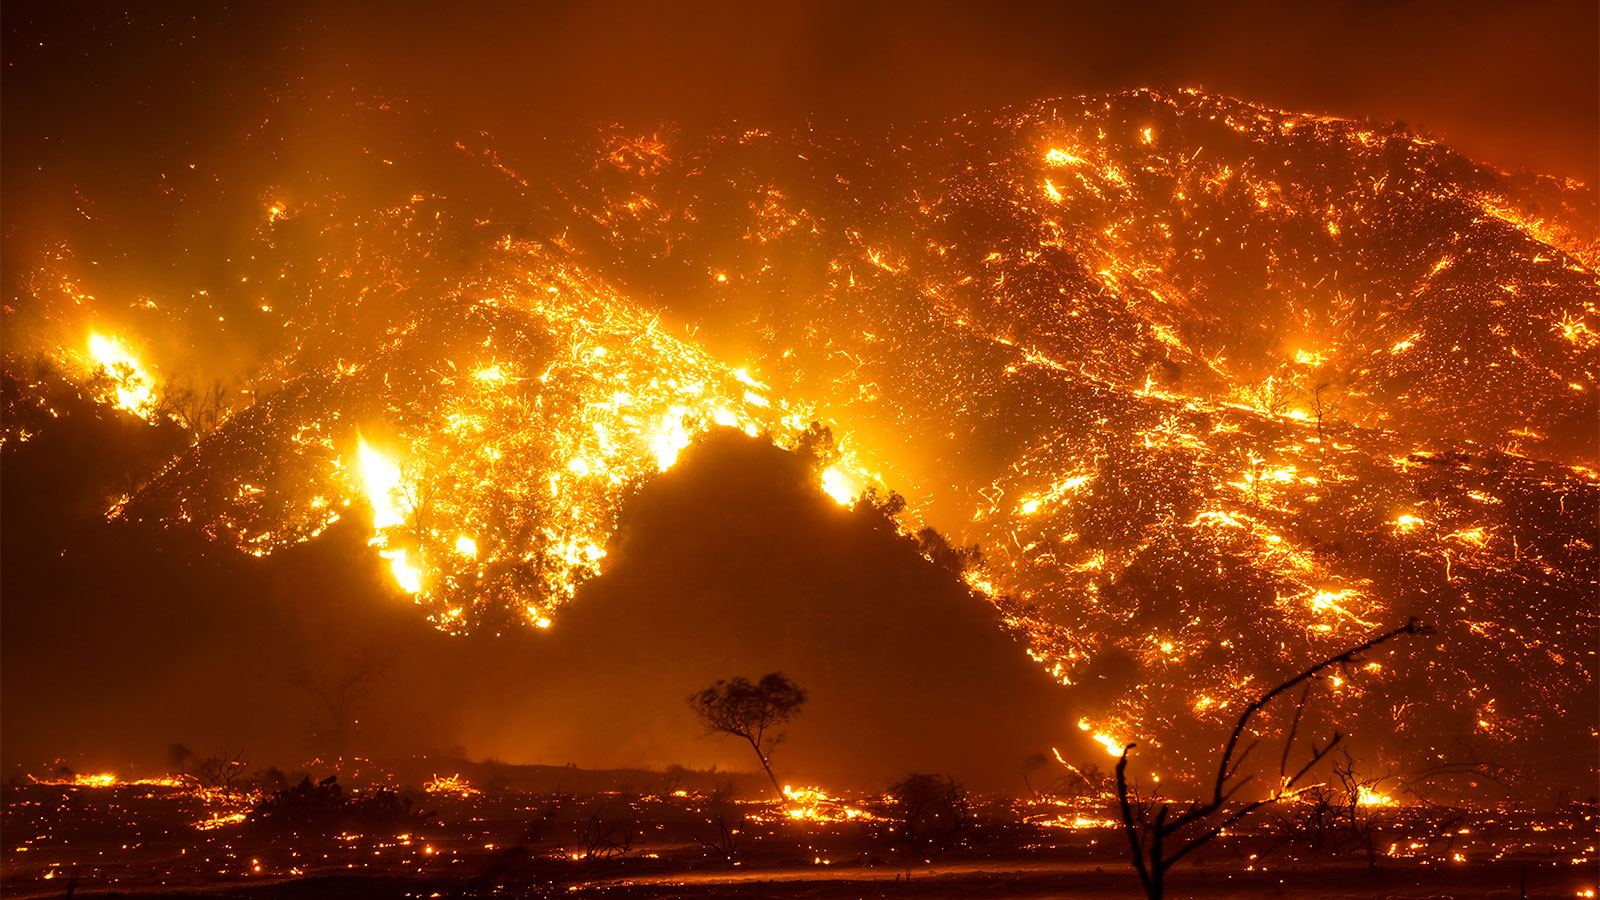 A photograph of the Bond Wildfire in California